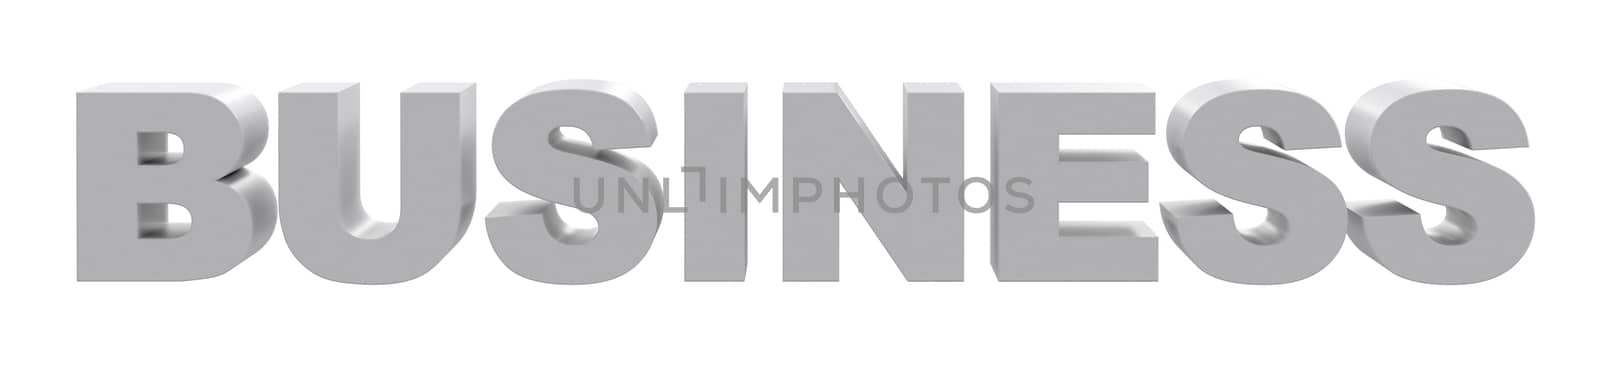 Word business on isolated white background, front view